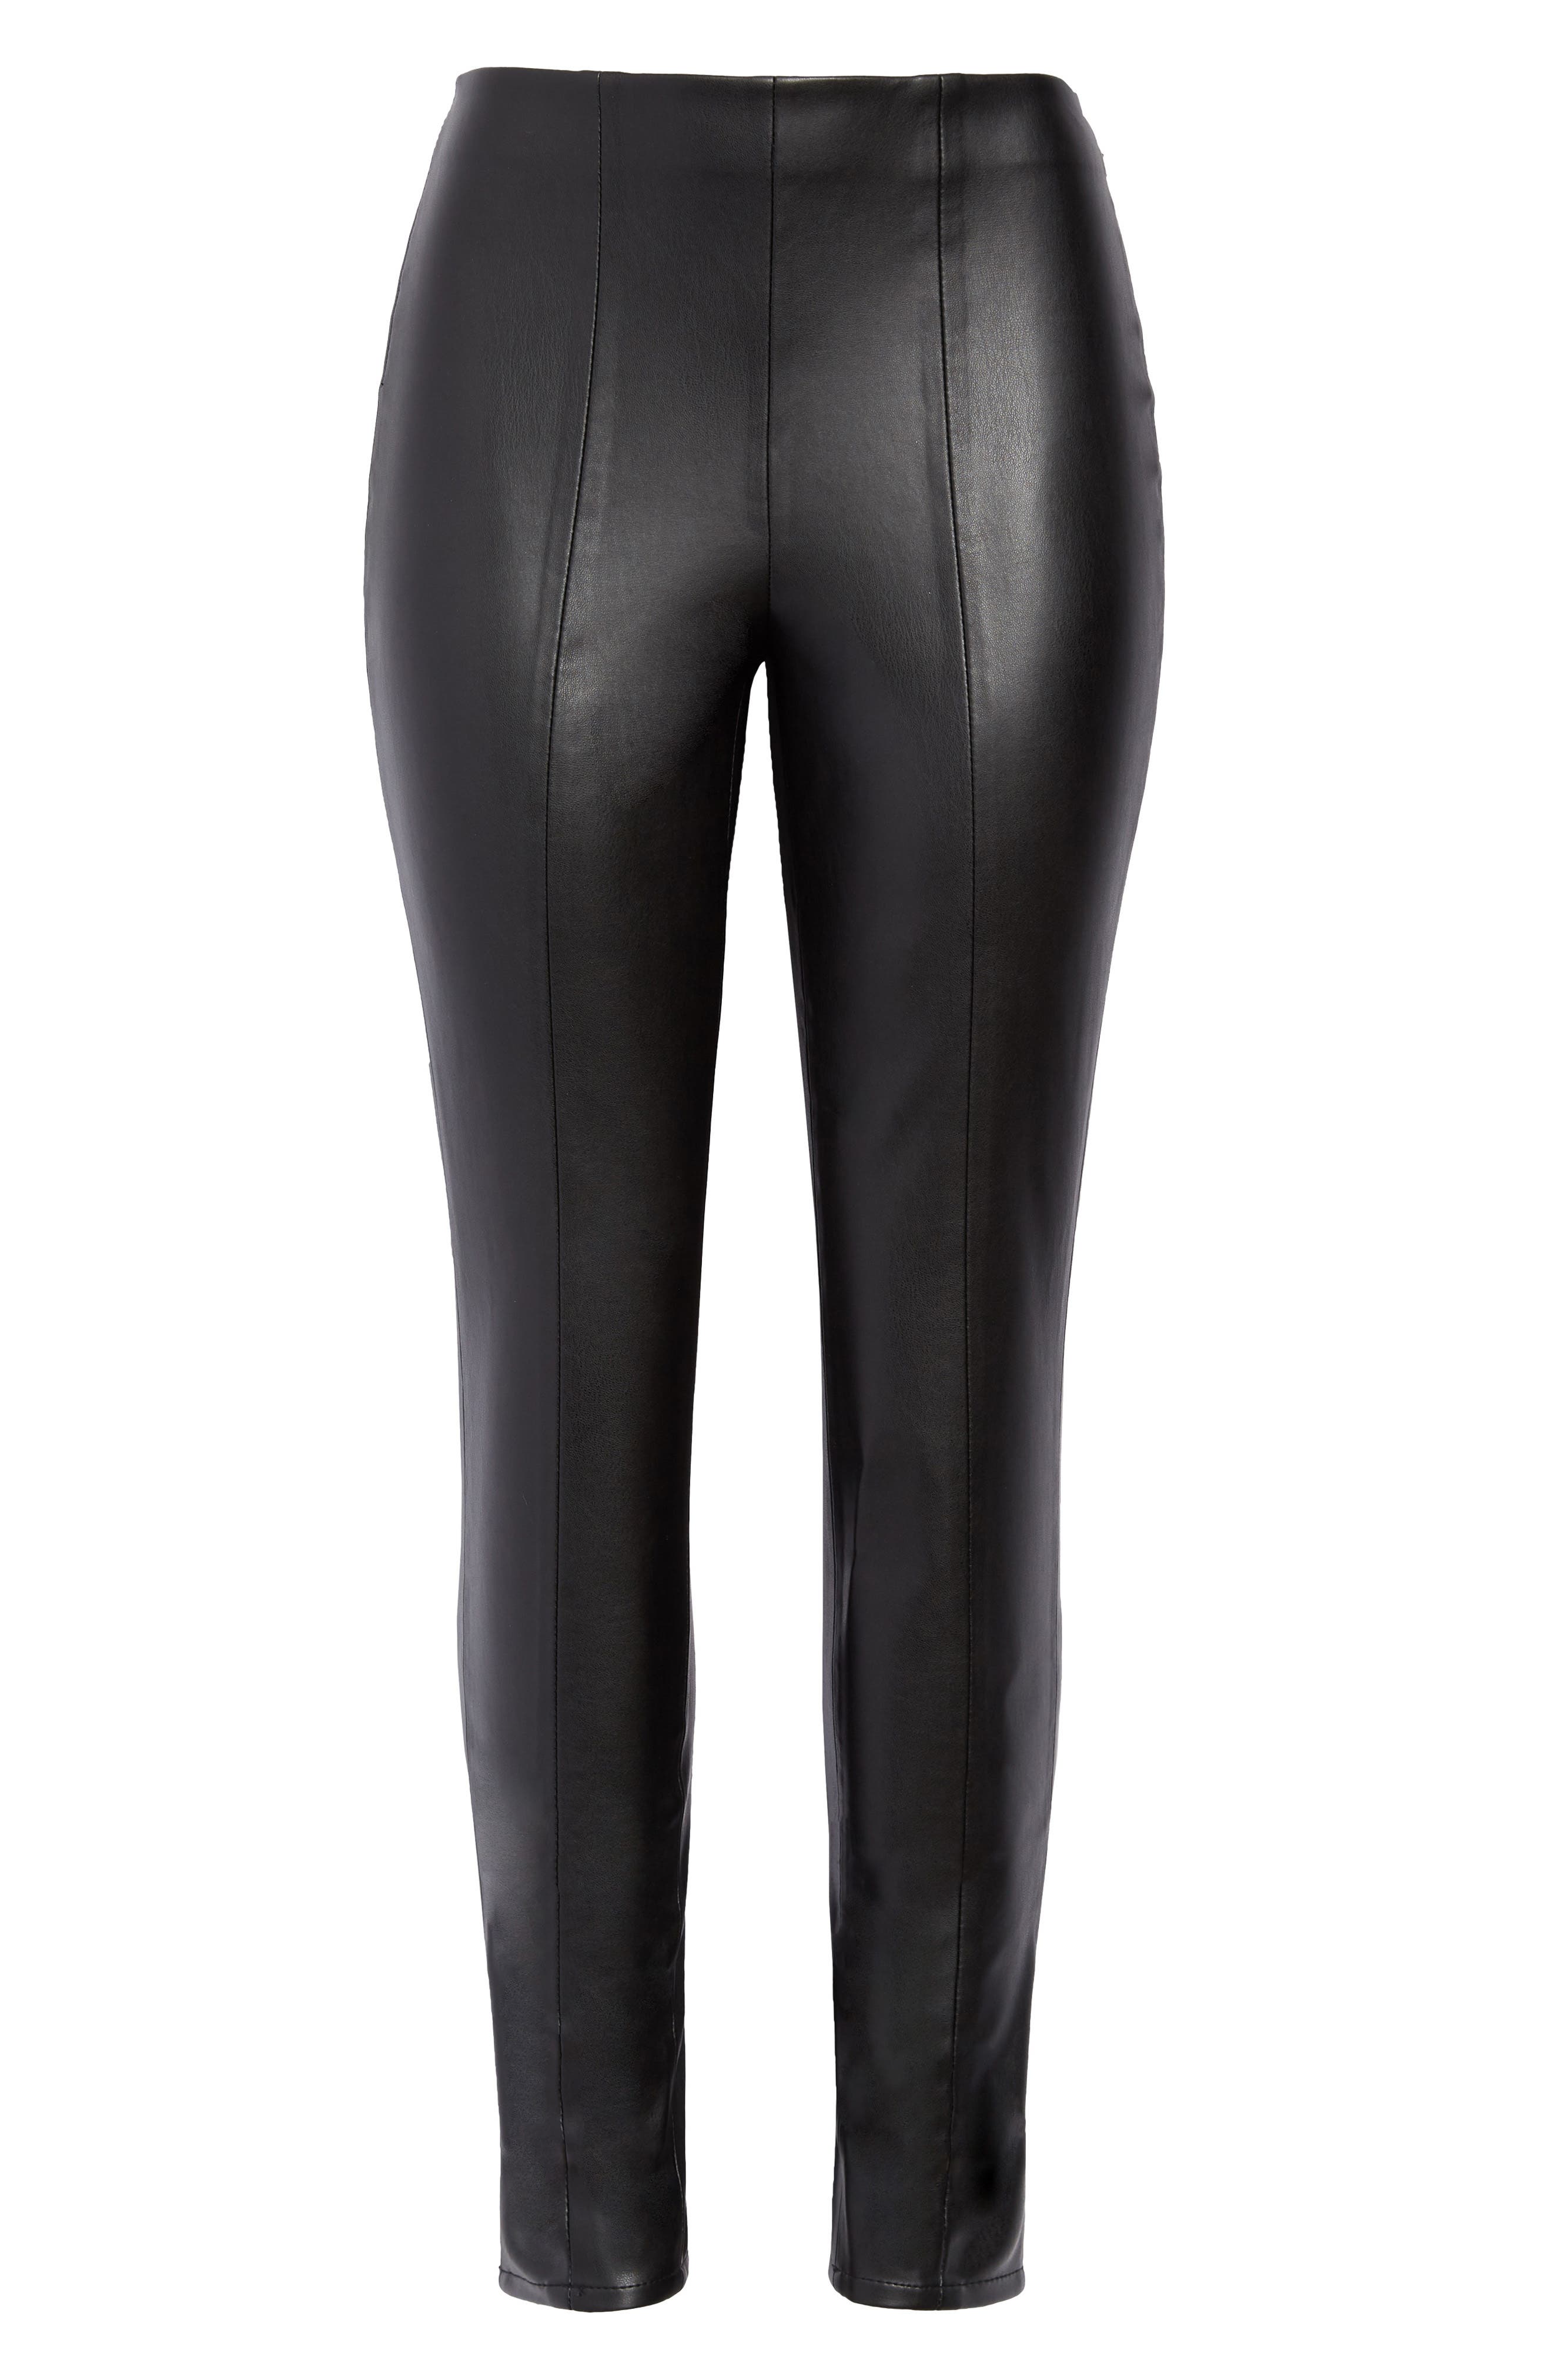 black faux leather jeggings